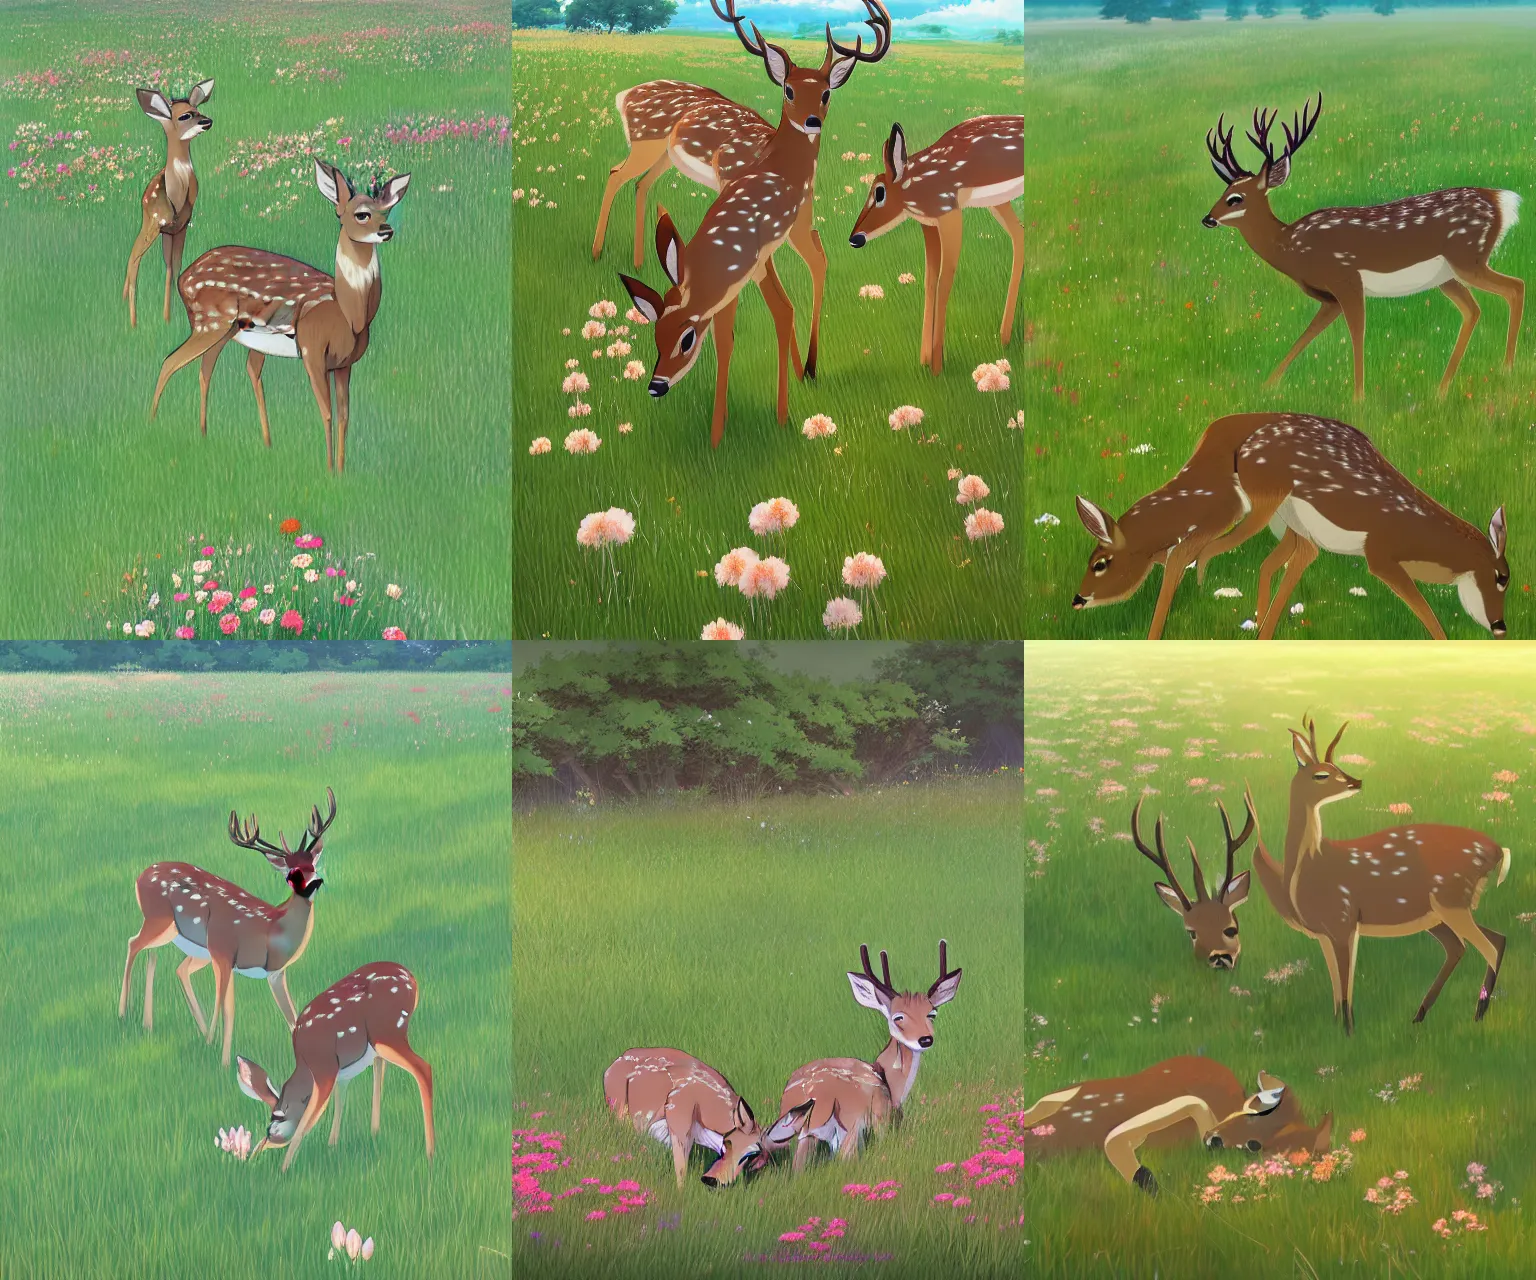 Prompt: two deer nuzzling each other in a field of flowers, art by Makoto Shinkai